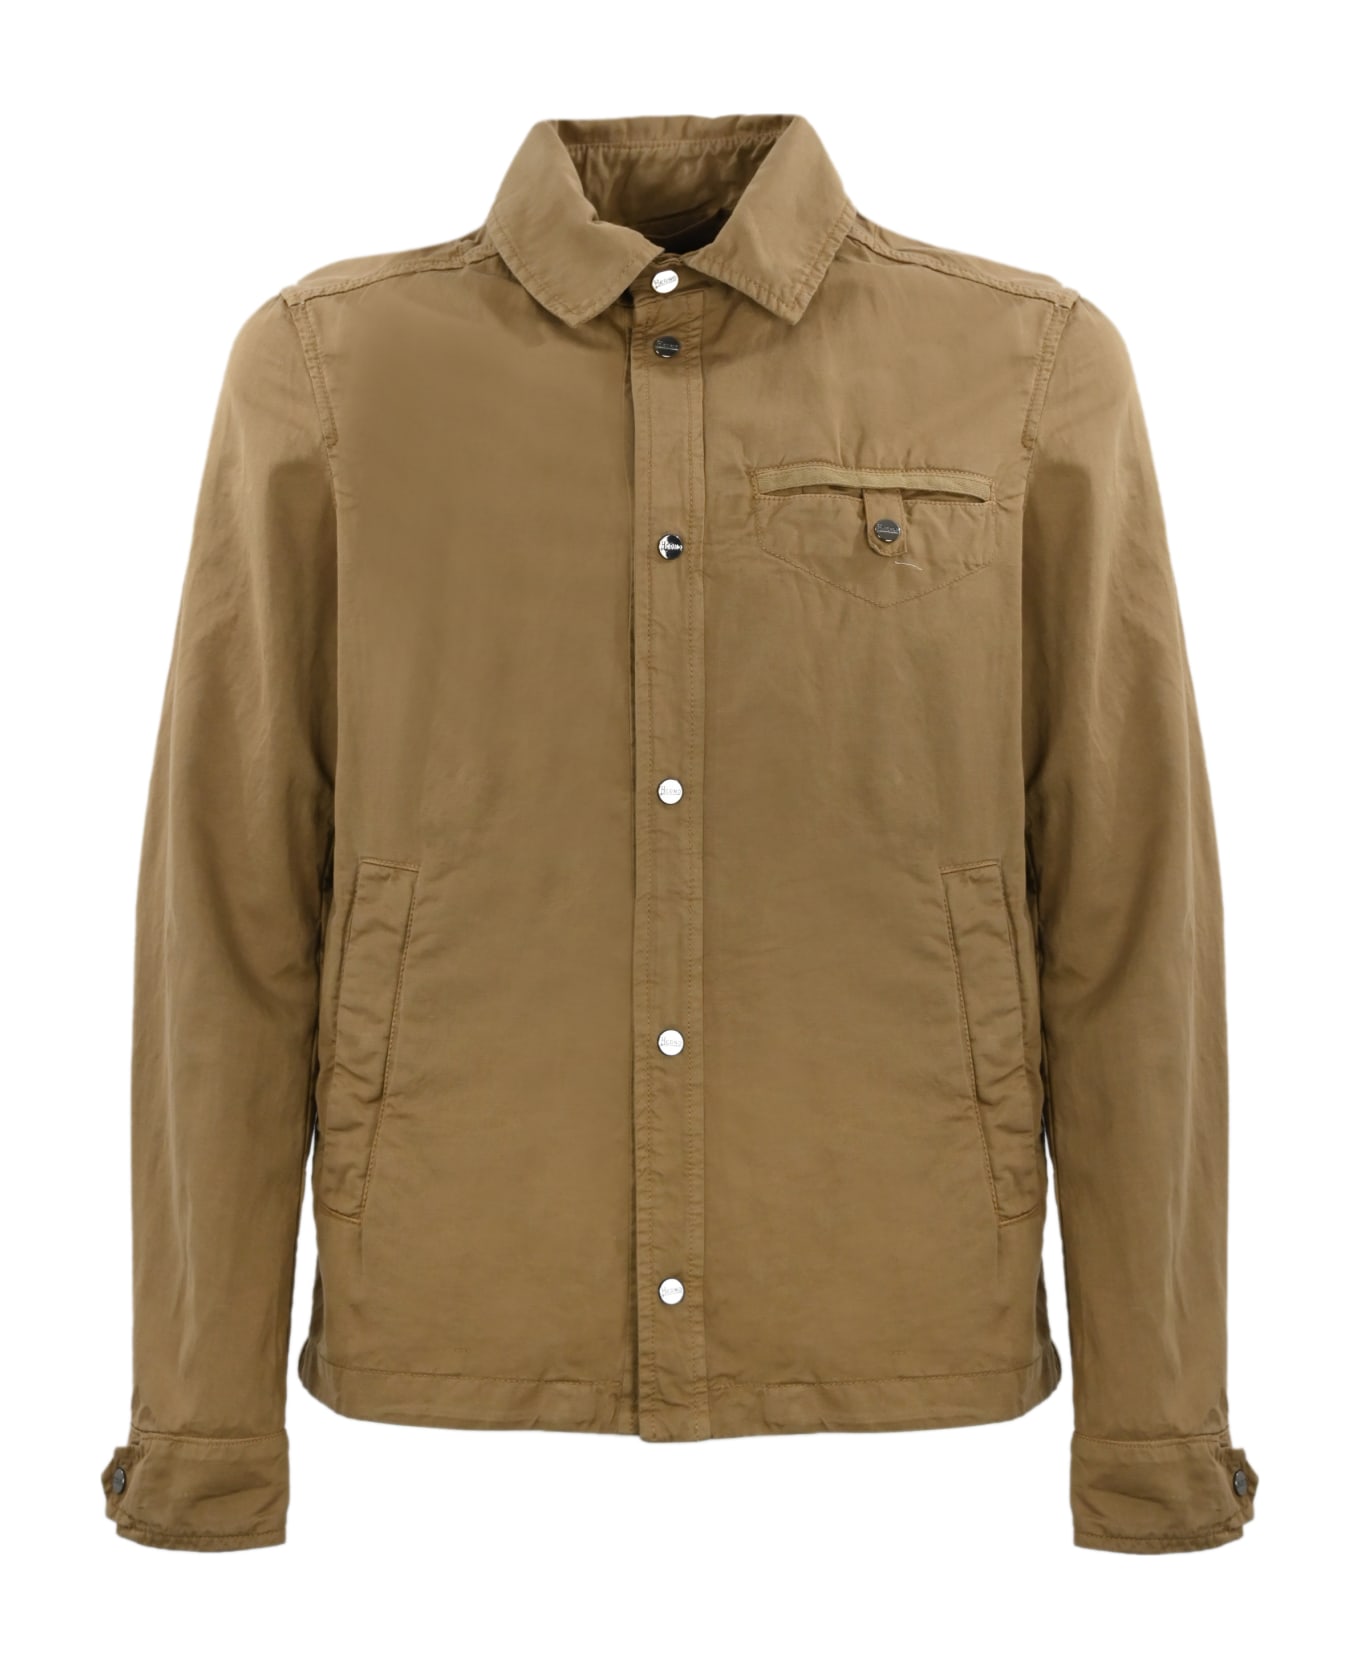 Herno Jacket In Cotton And Linen Blend - Cammello ジャケット